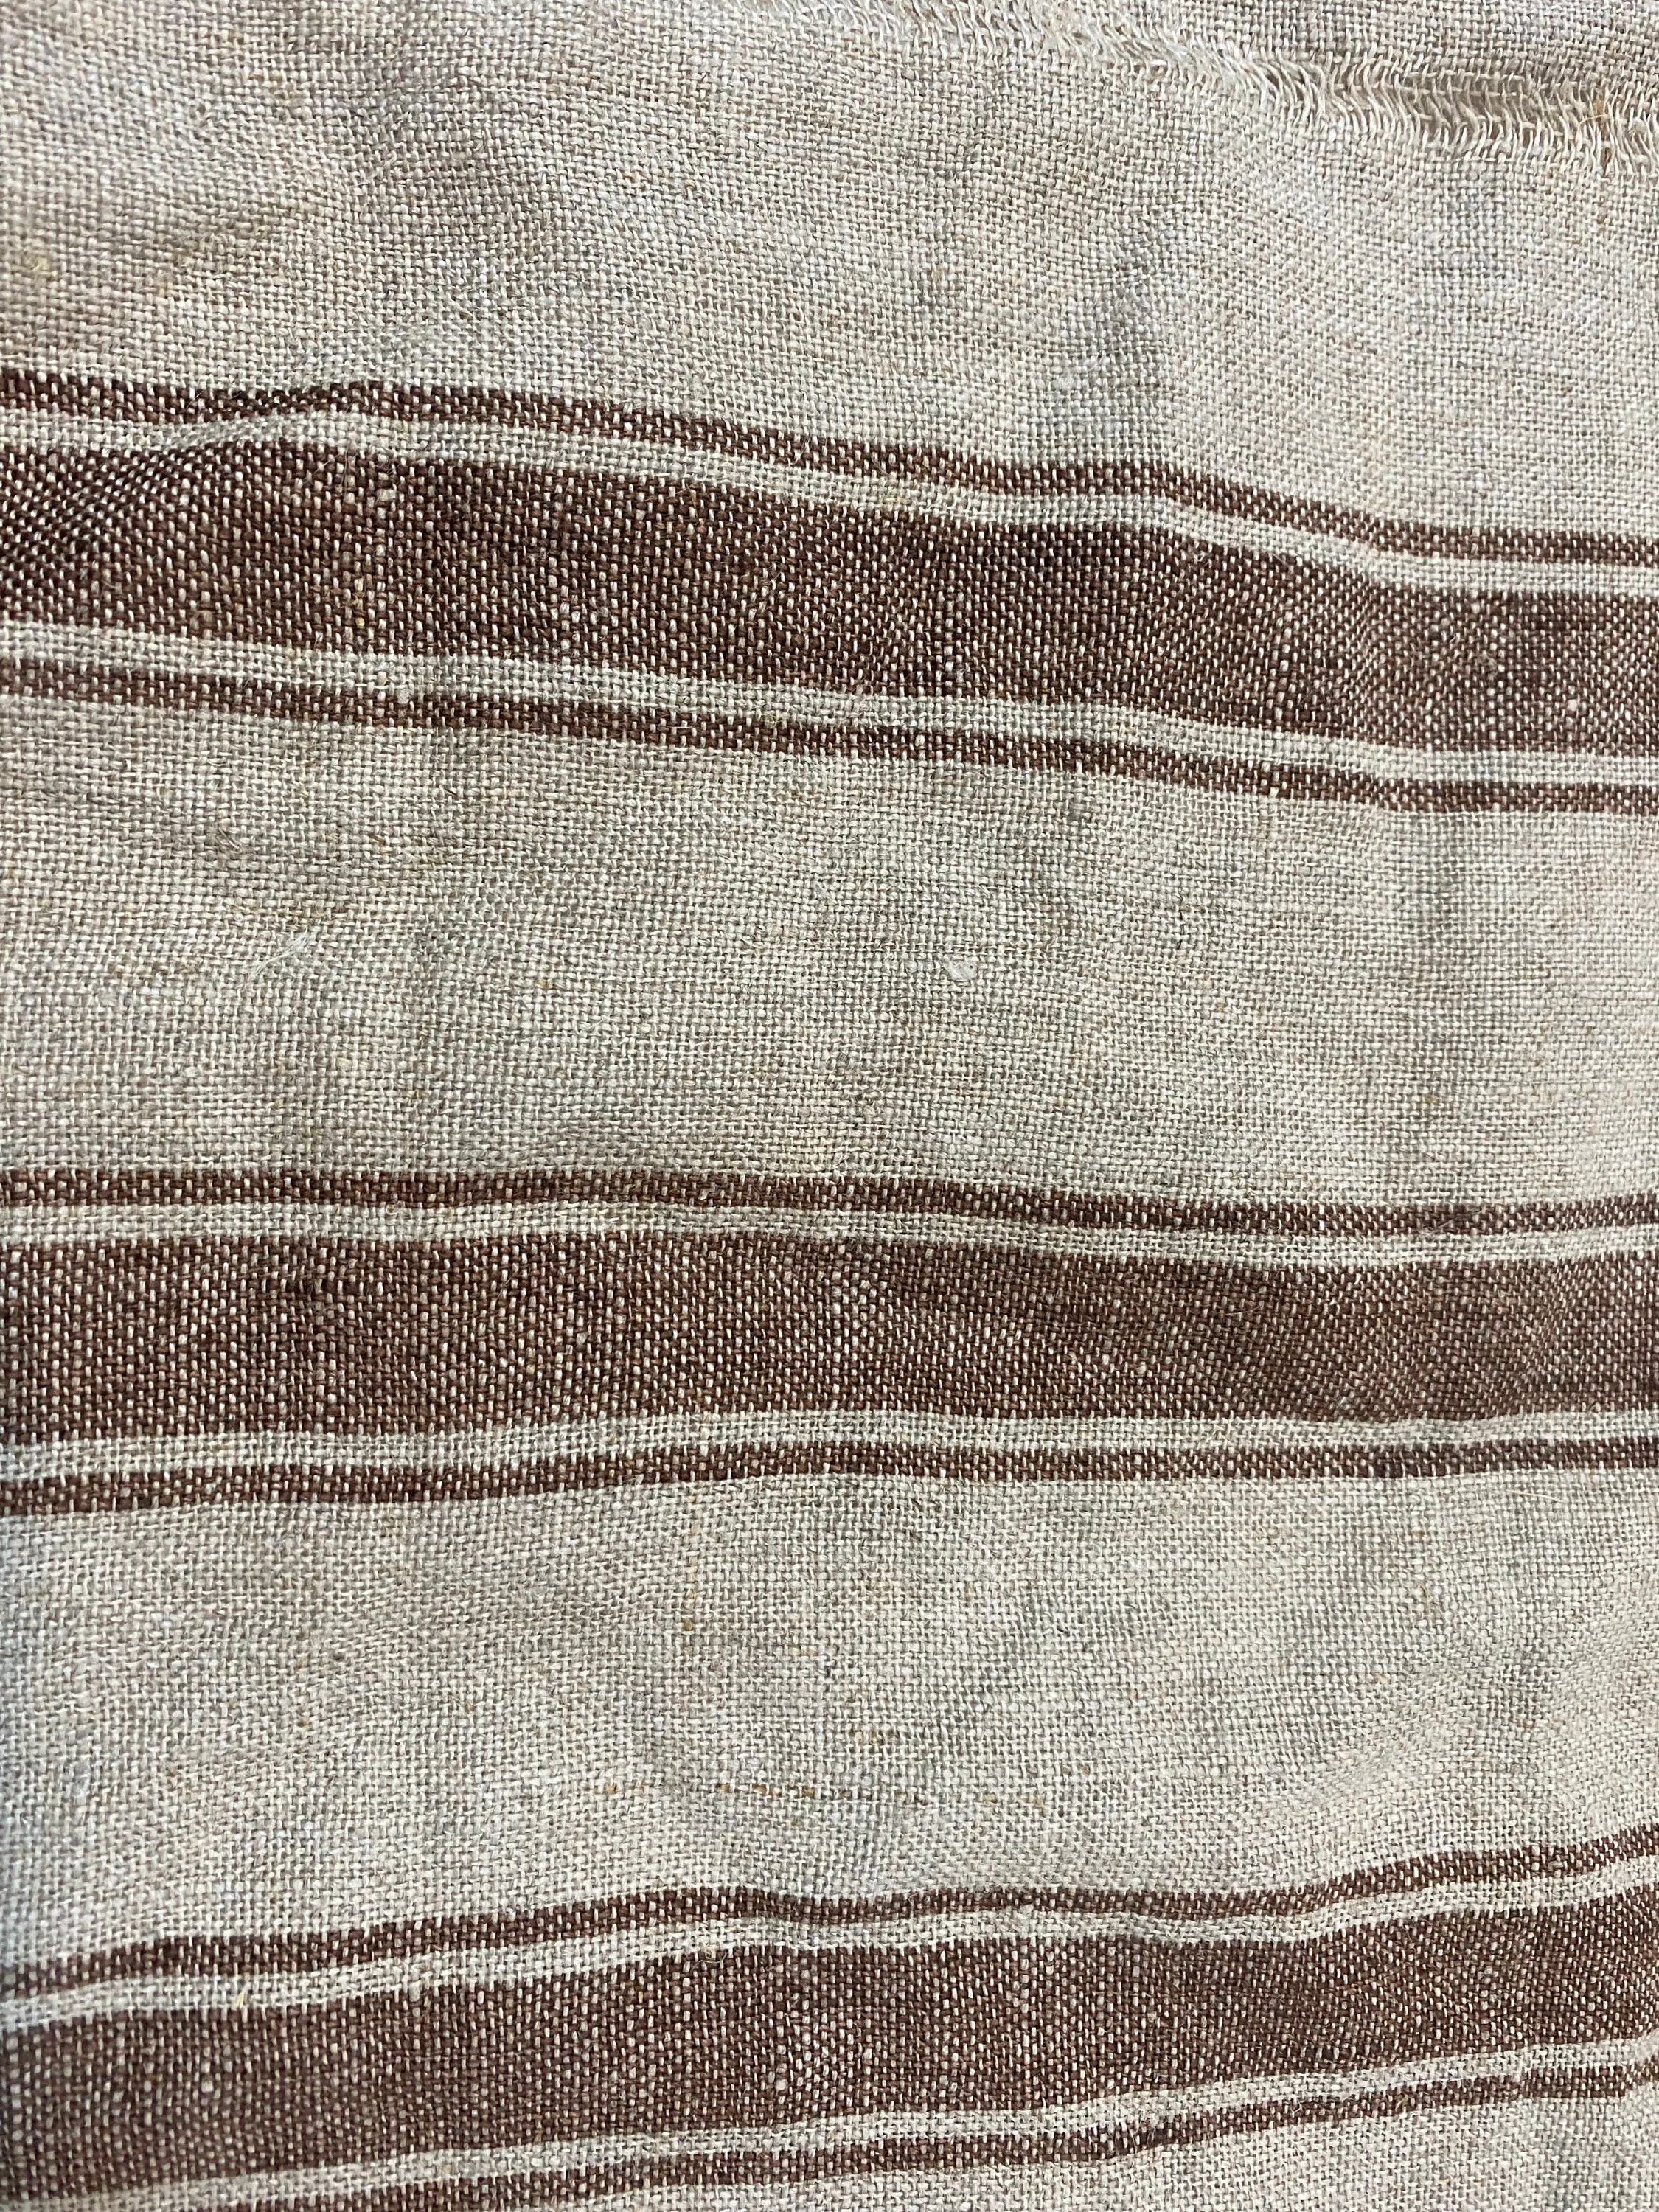 Red/Natural Striped Ticking fabric ~ Rockland/Roc-Lon 100% cotton woven  fabric - 18x22 inches